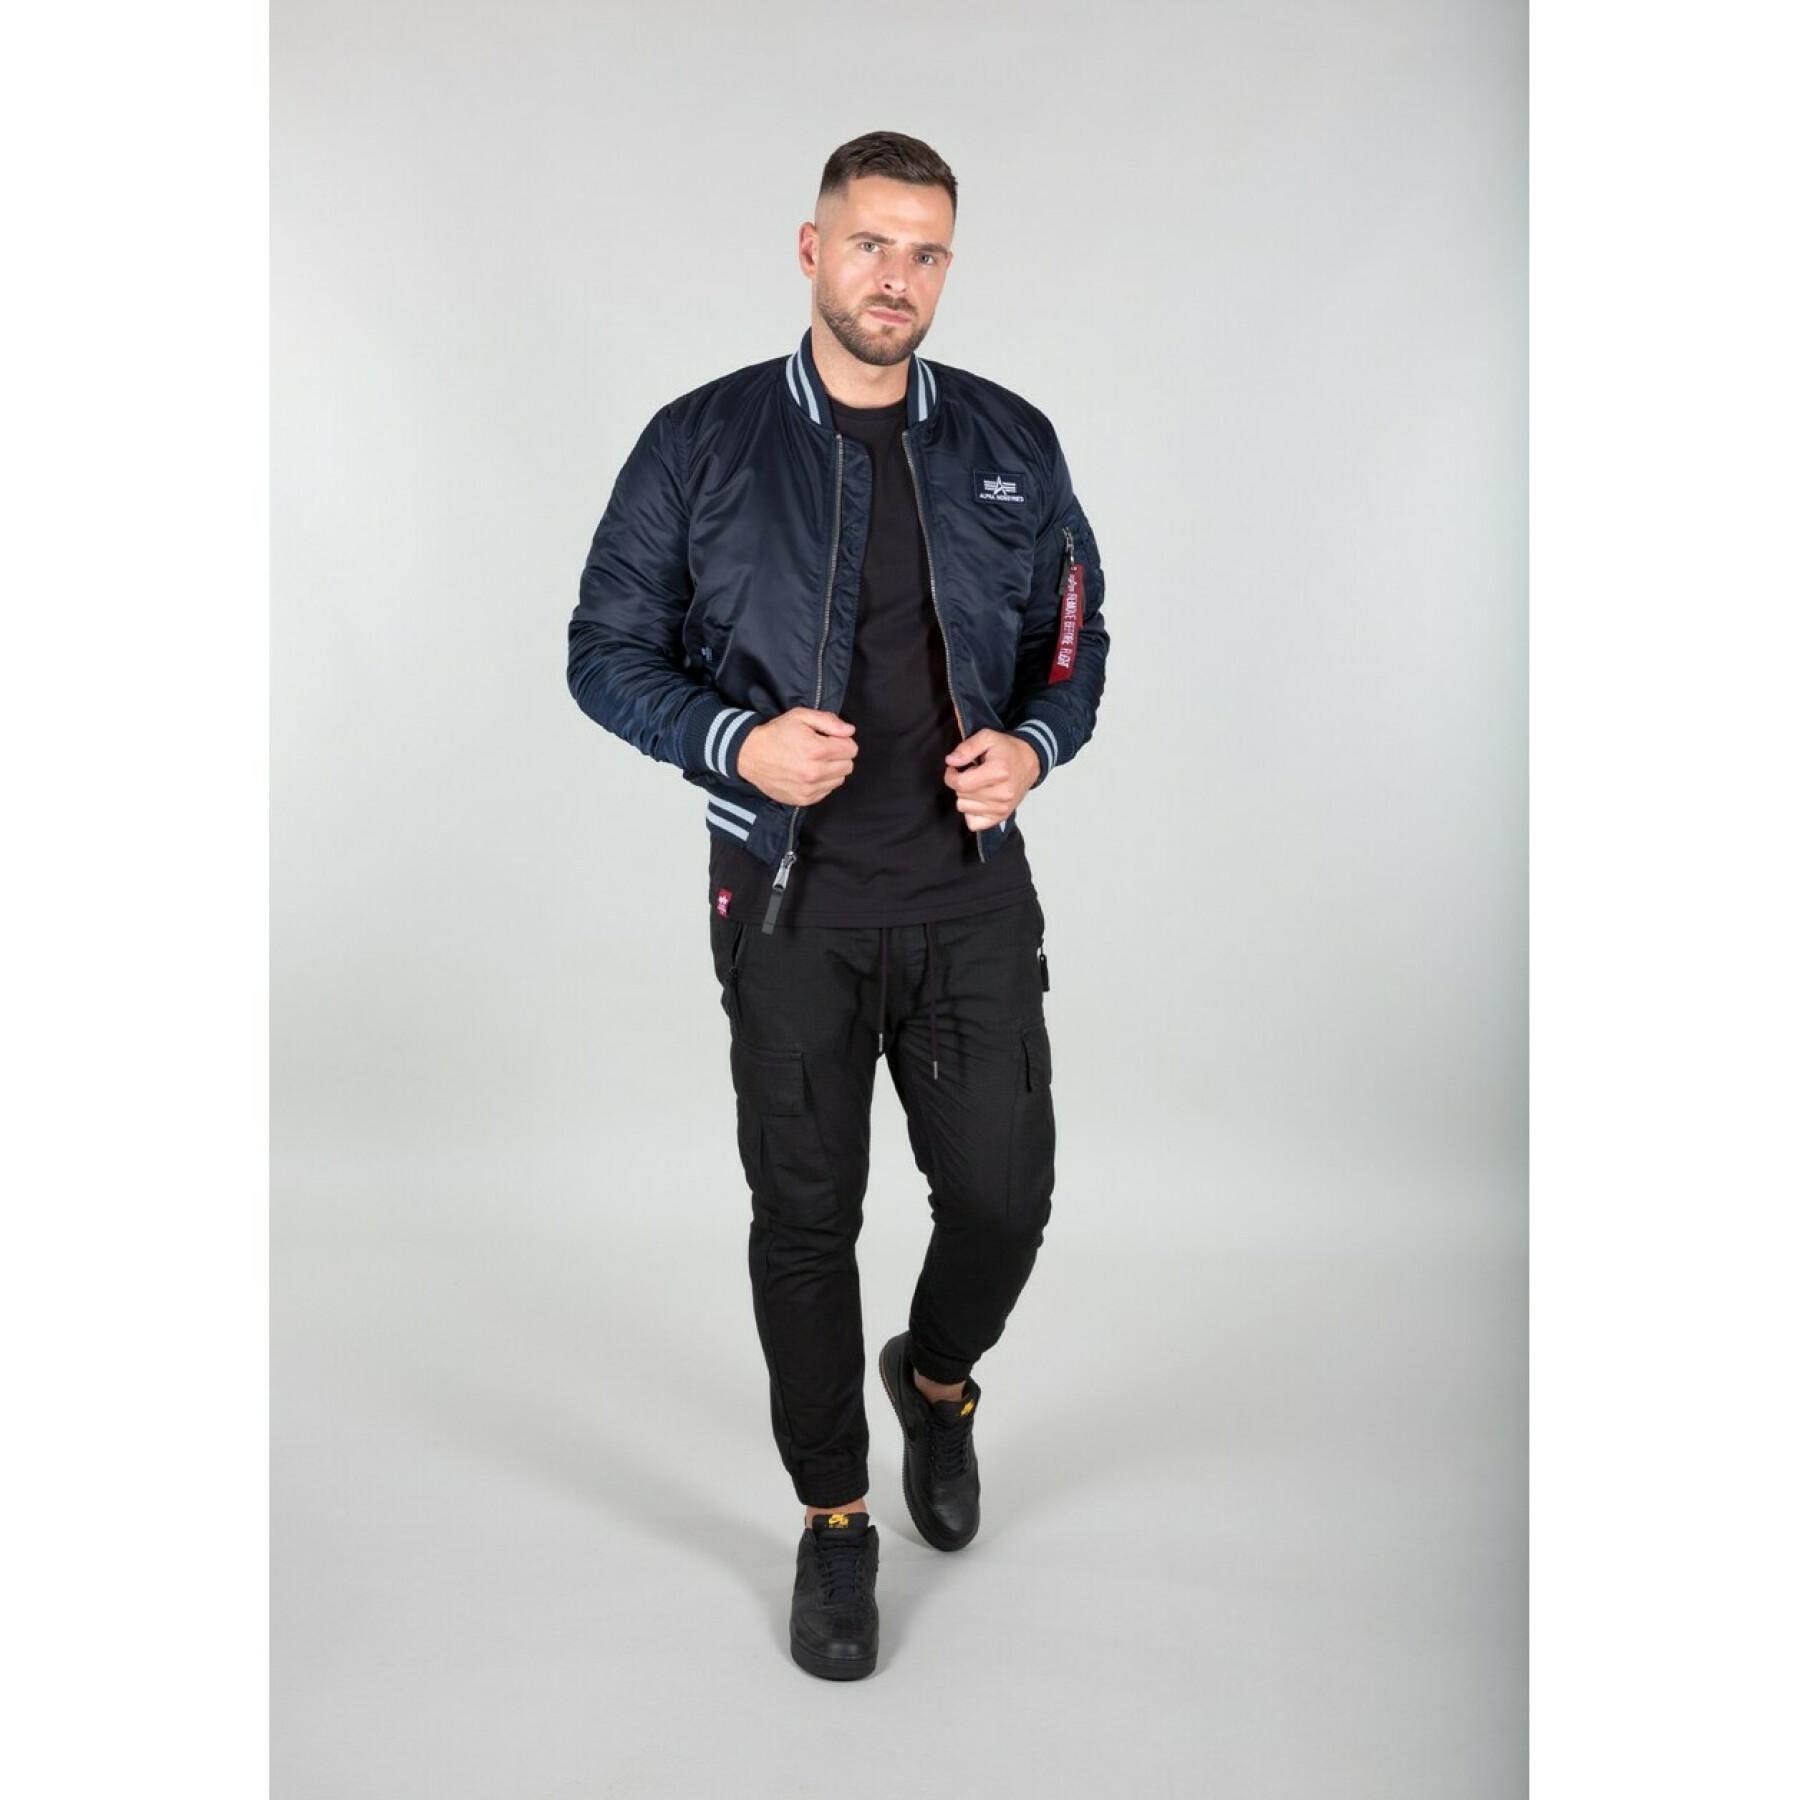 Bomber Alpha Industries College FN